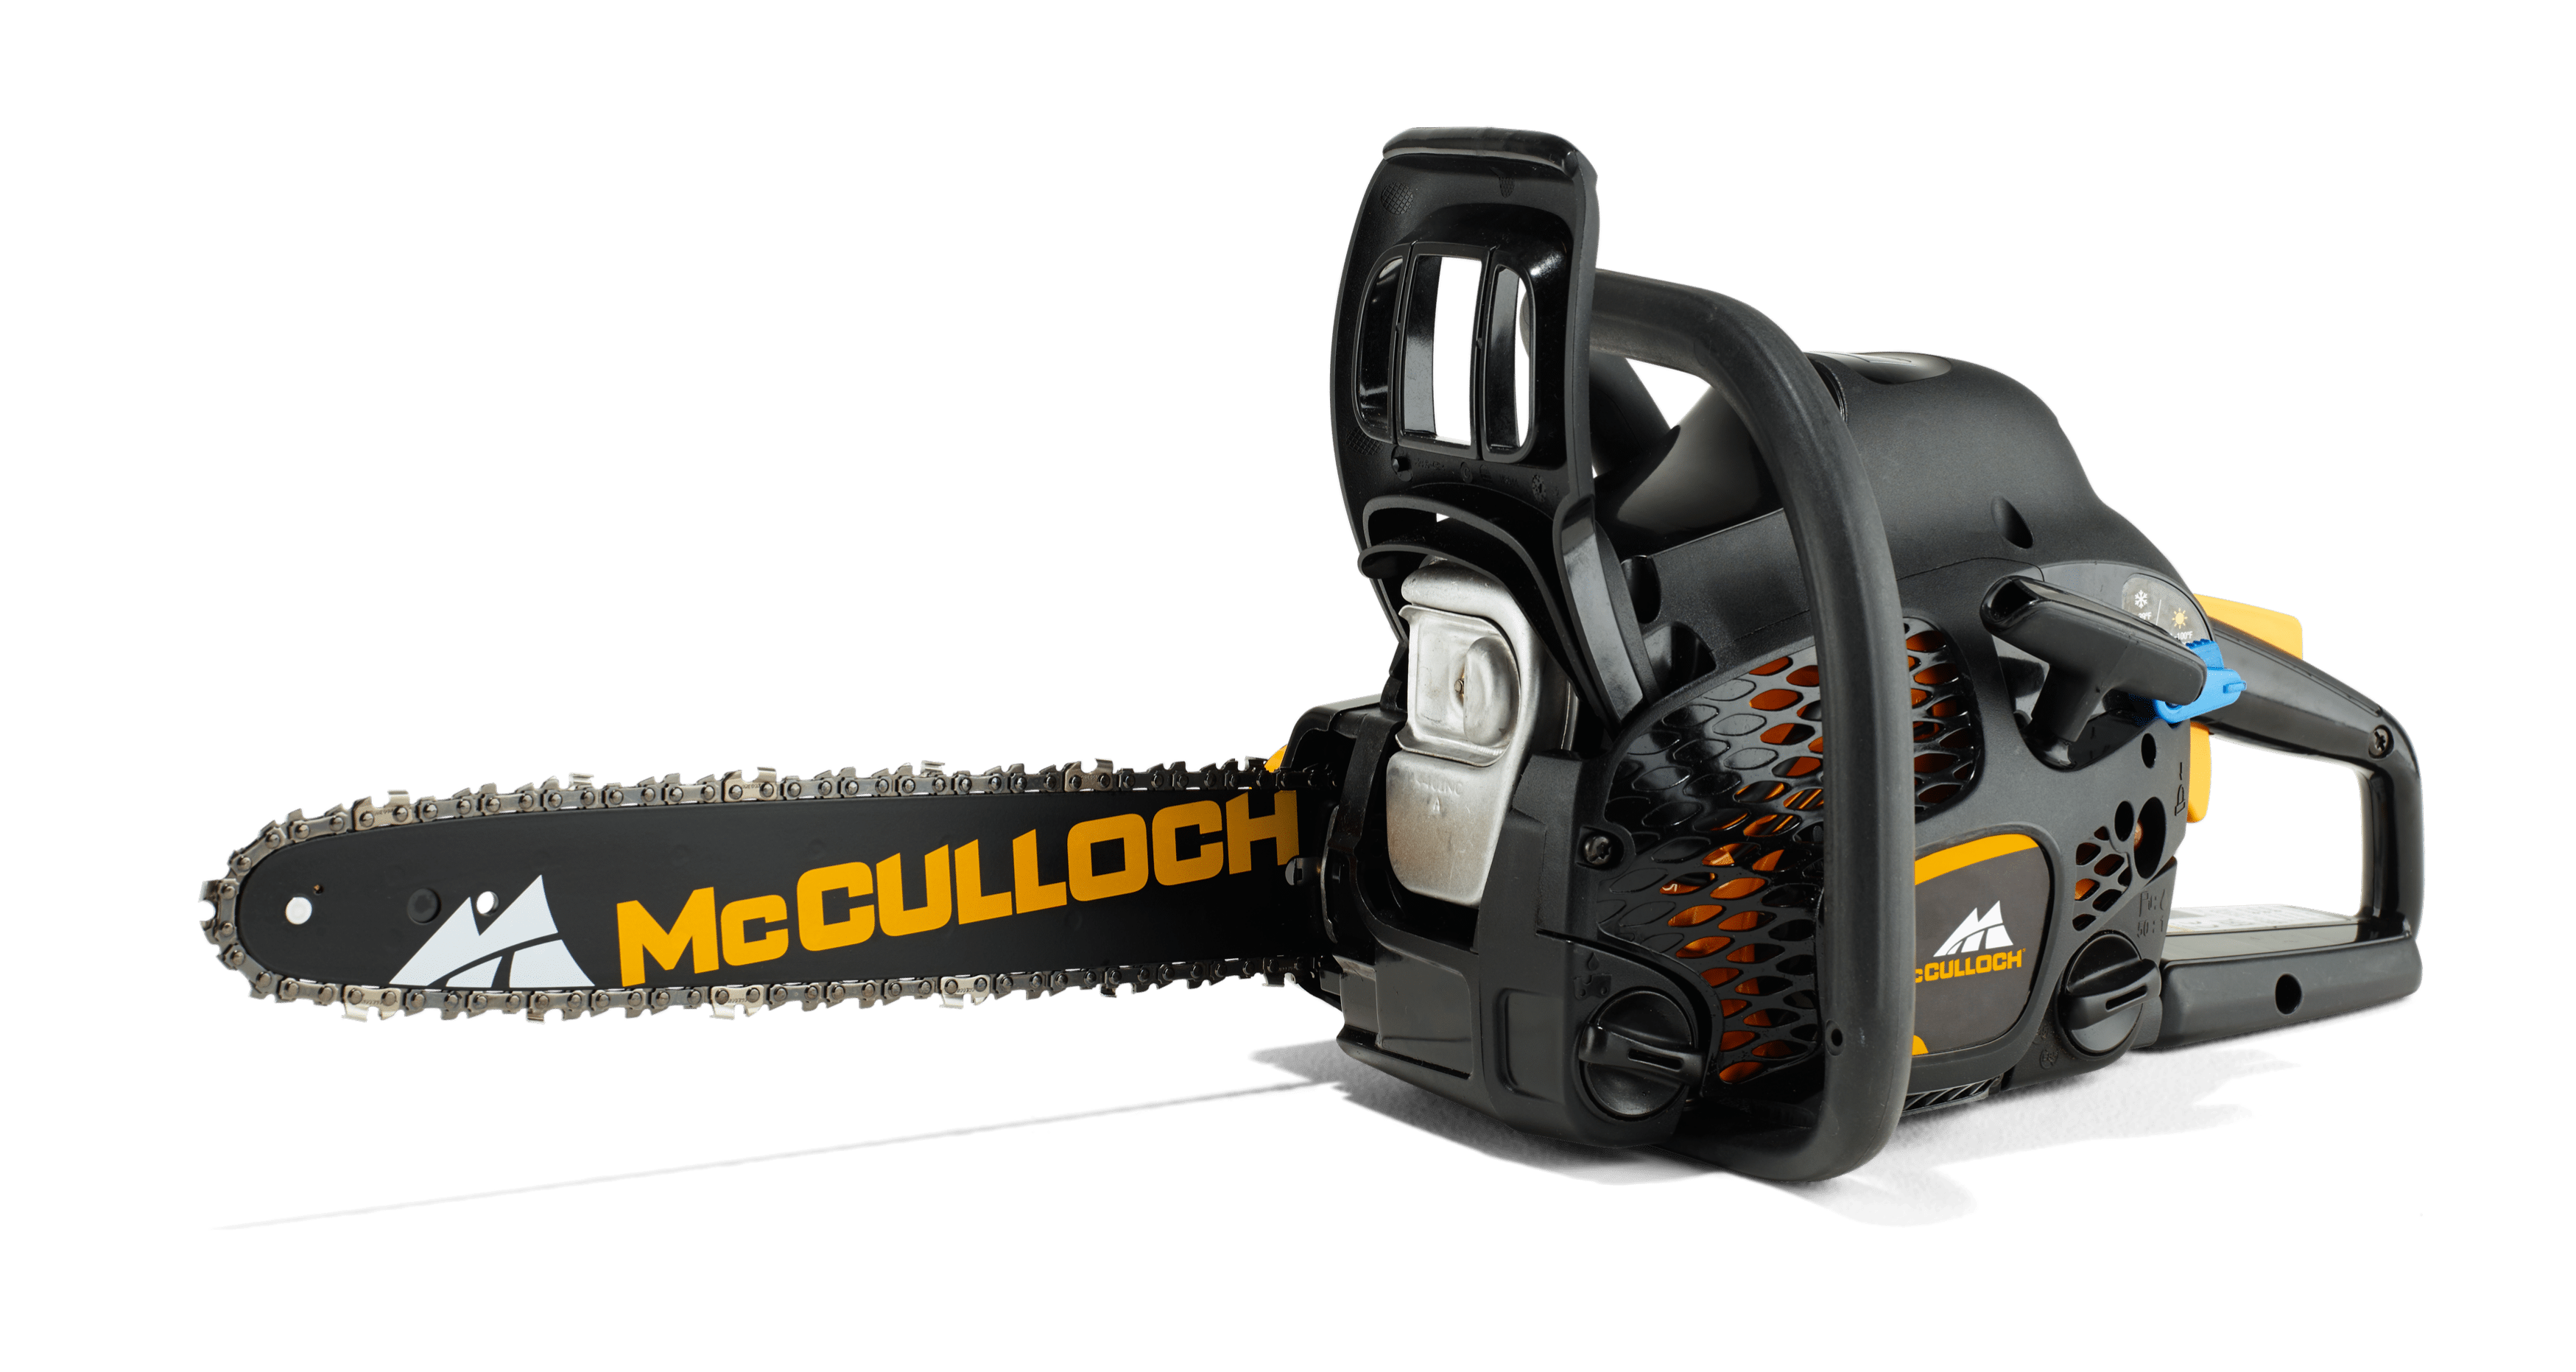 Degrassi Nackt Models Of Mcculloch Chainsaws